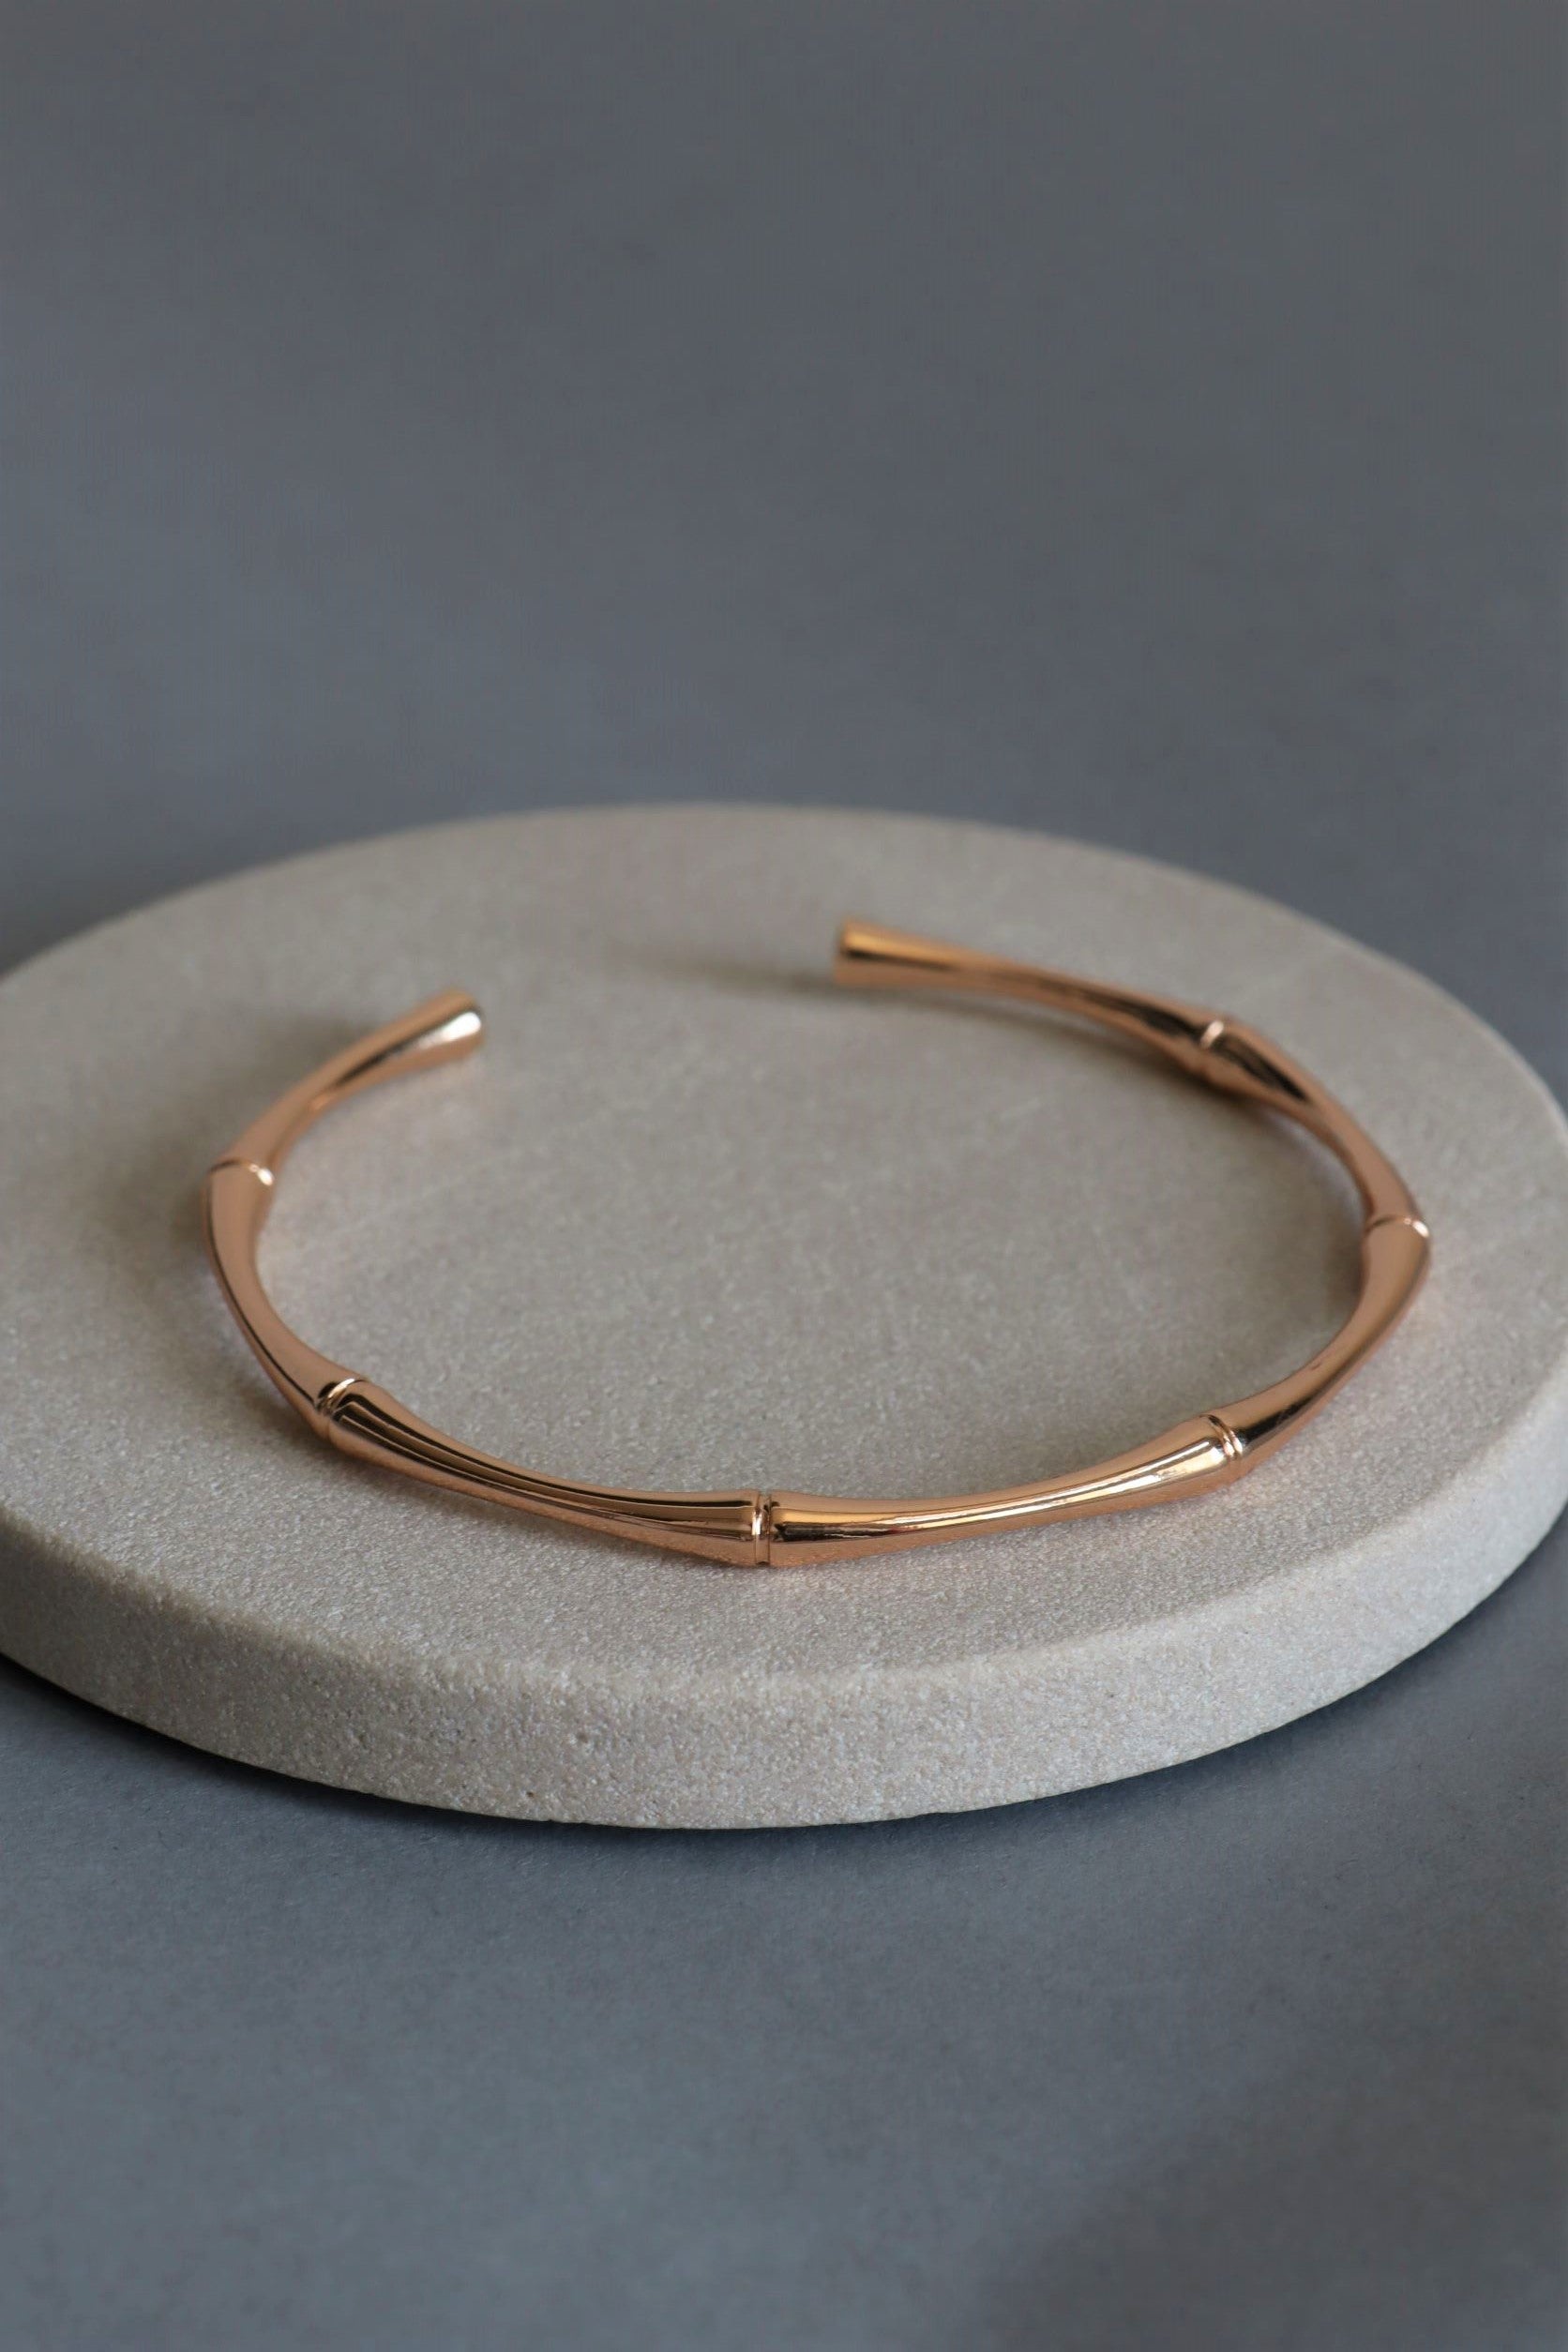 Bamboo Cuff Bracelet - Simply Clutched